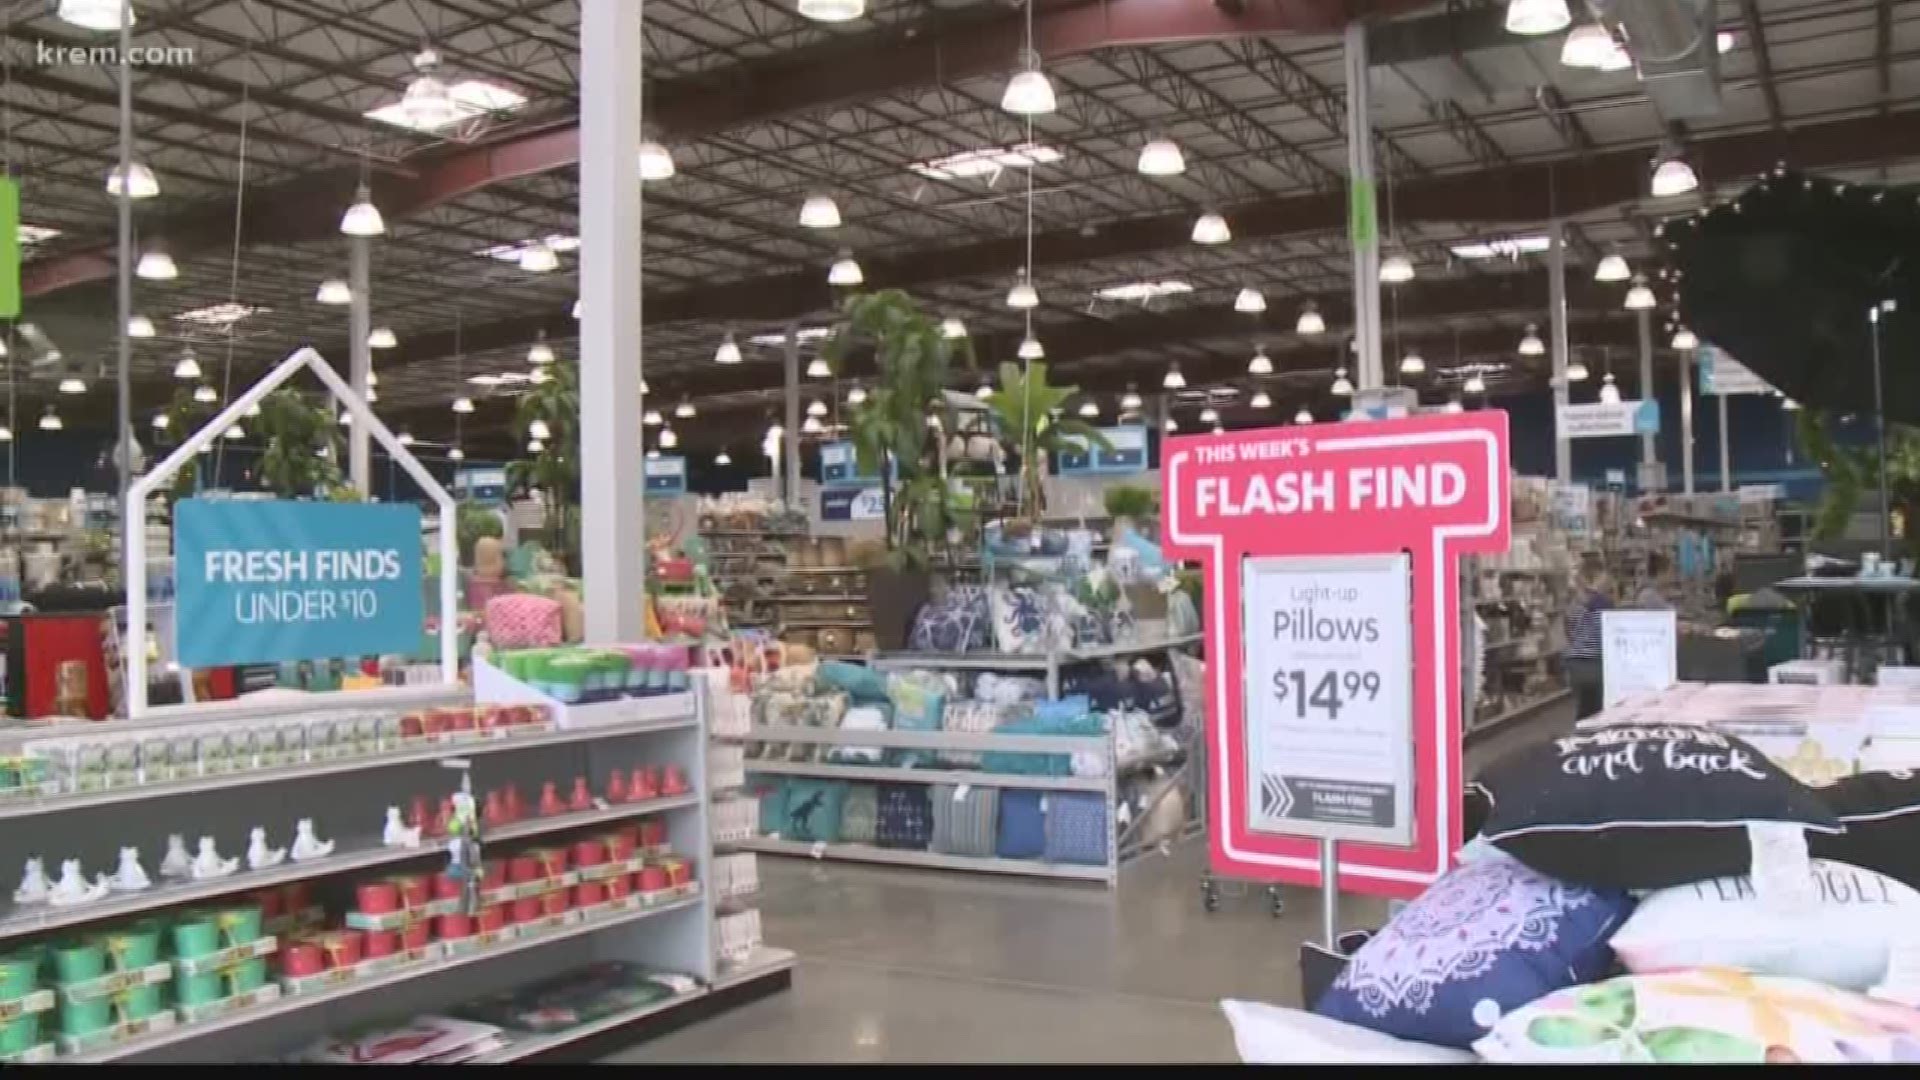 KREM Reporter Amanda Roley visited the newly opened At Home Superstore in Spokane.